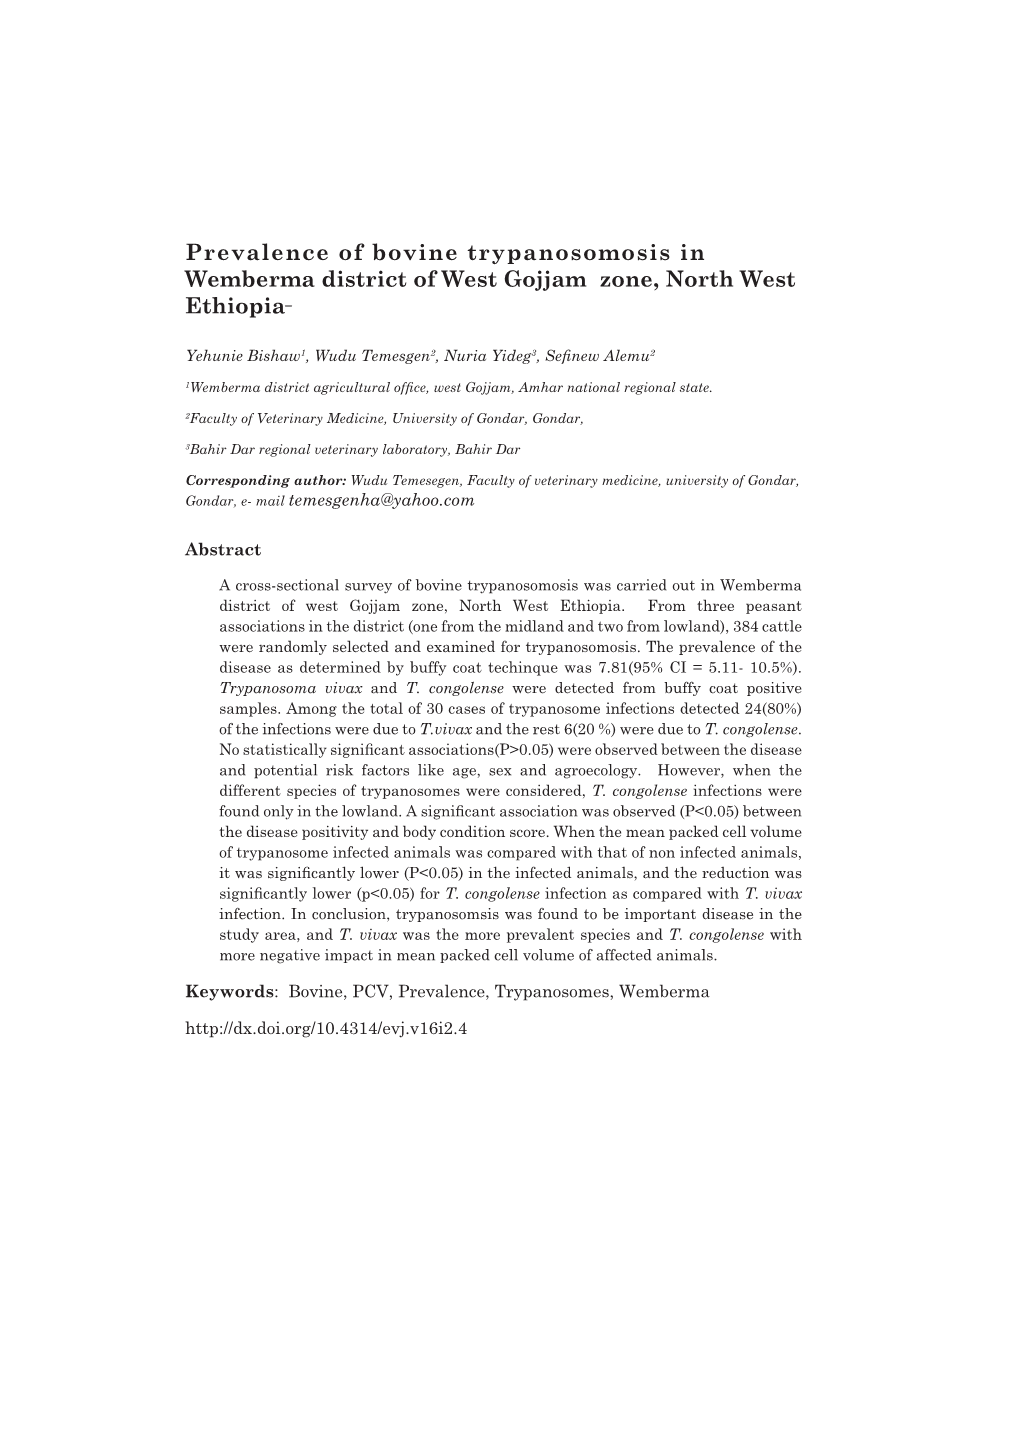 Prevalence of Bovine Trypanosomosis in Wemberma District of West Gojjam Zone, North West Ethiopia